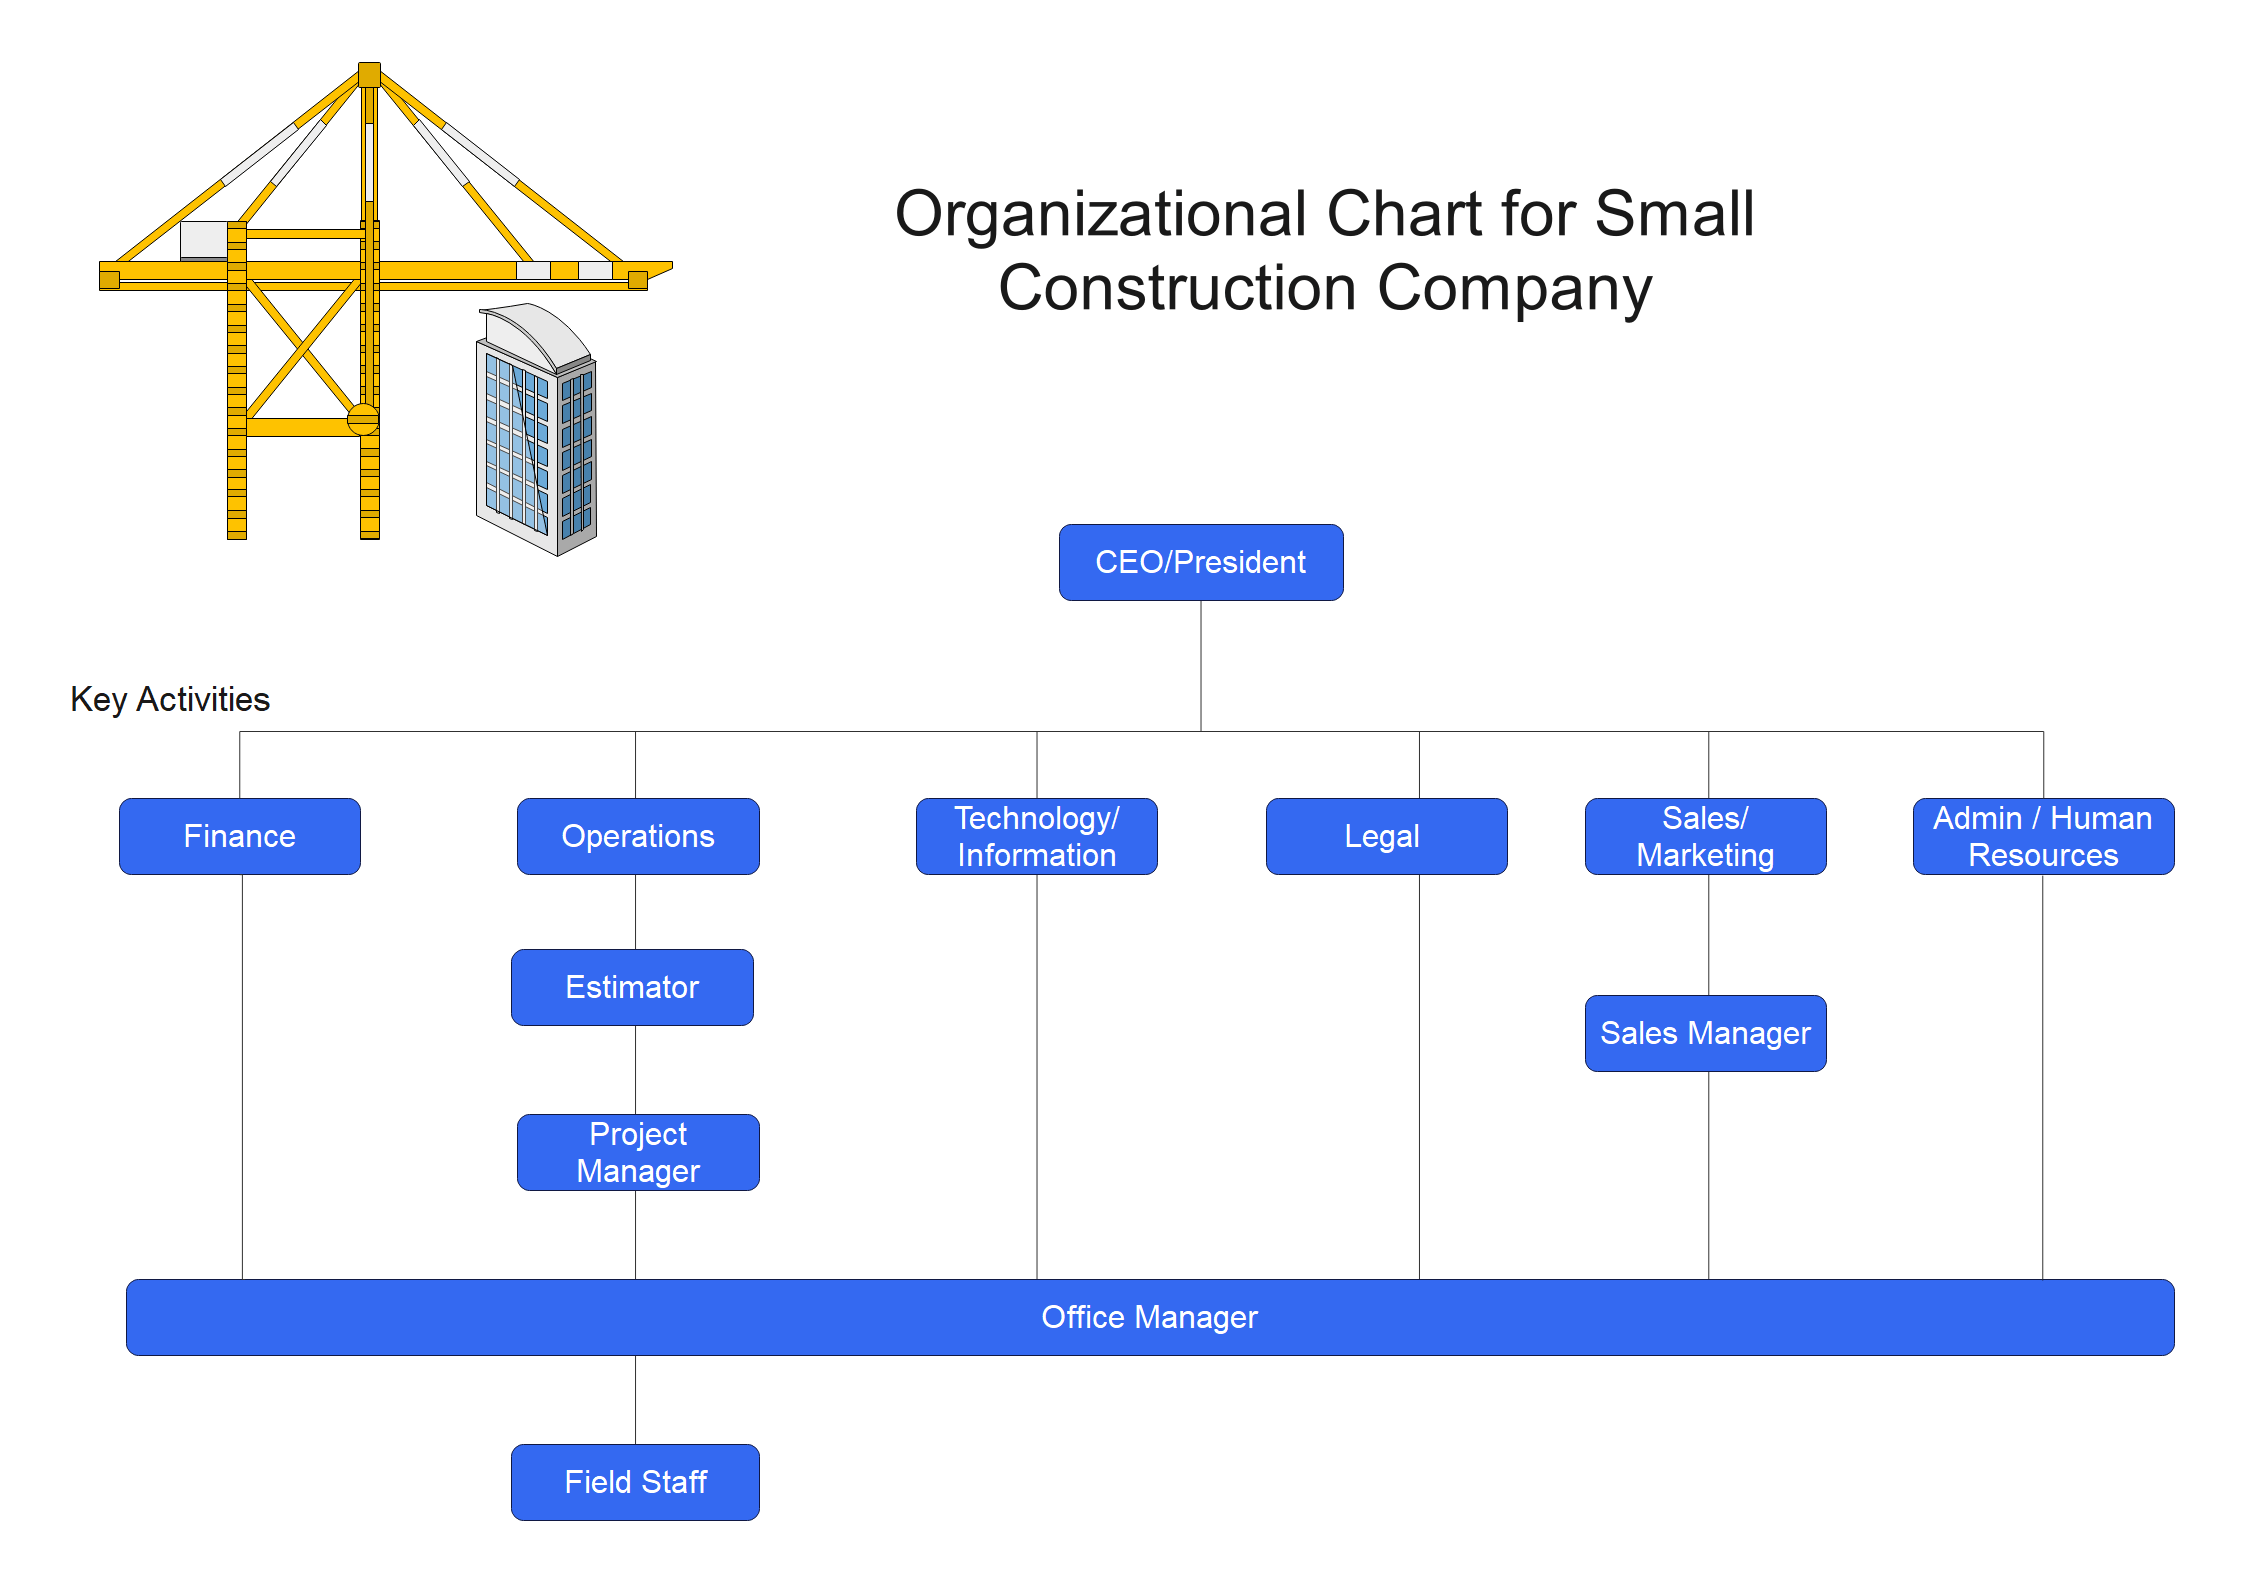 org chart for small business construction company